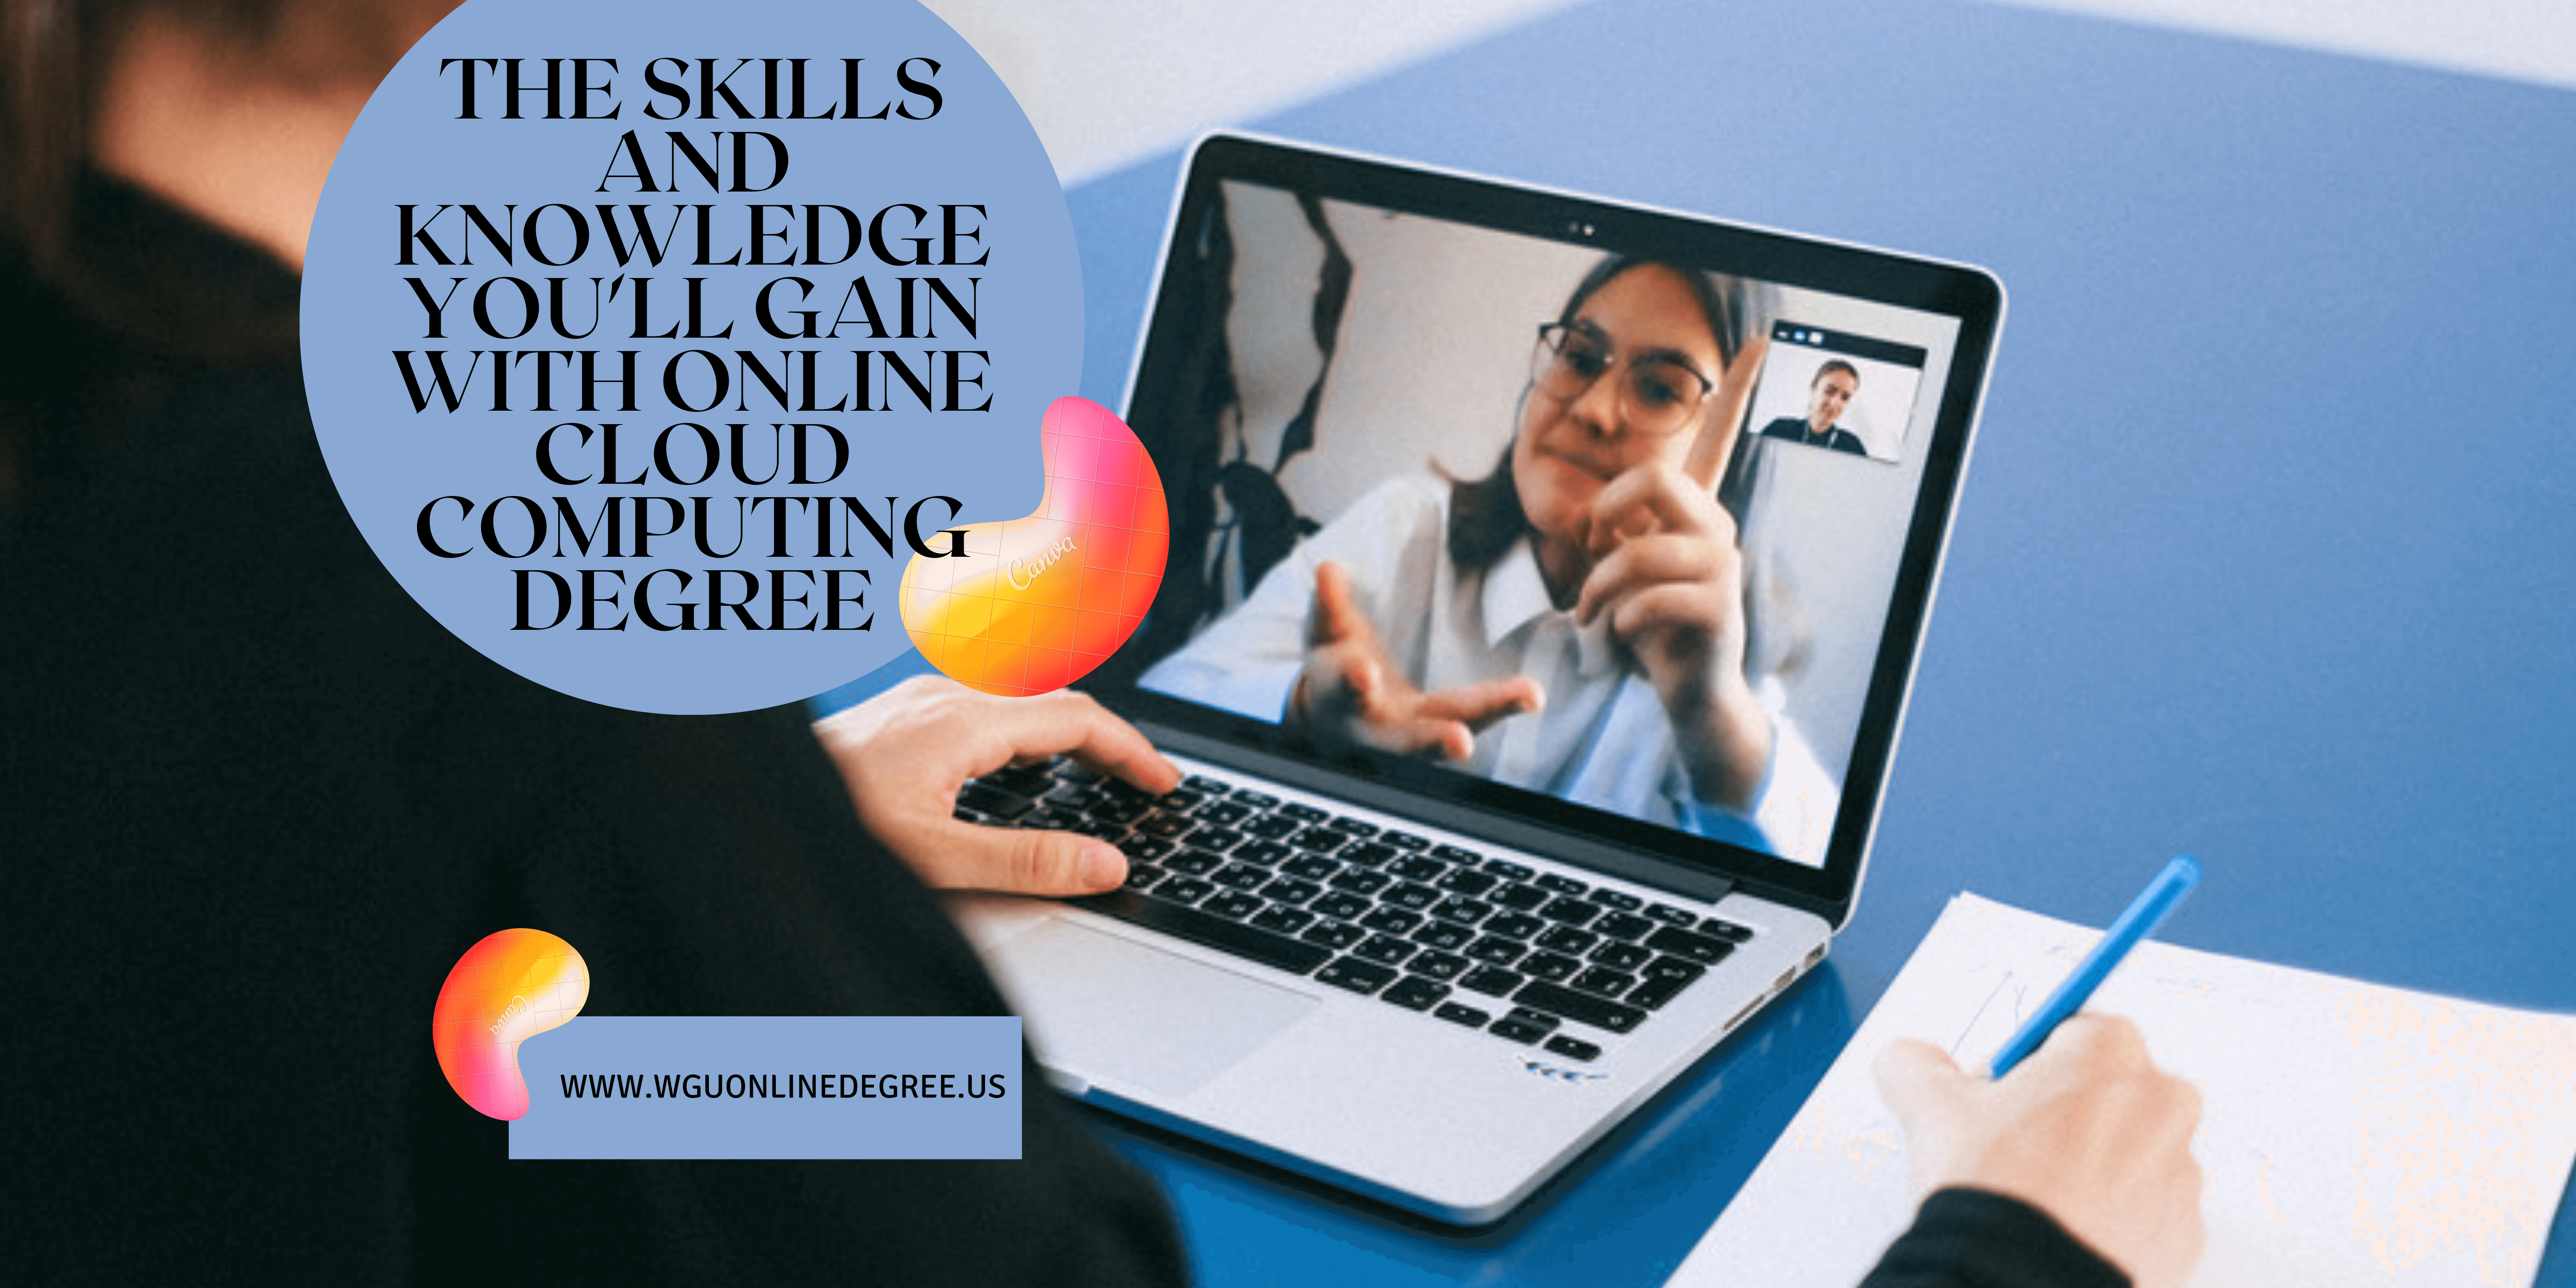 The Skills and Knowledge You'll Gain with Online Cloud Computing Degree